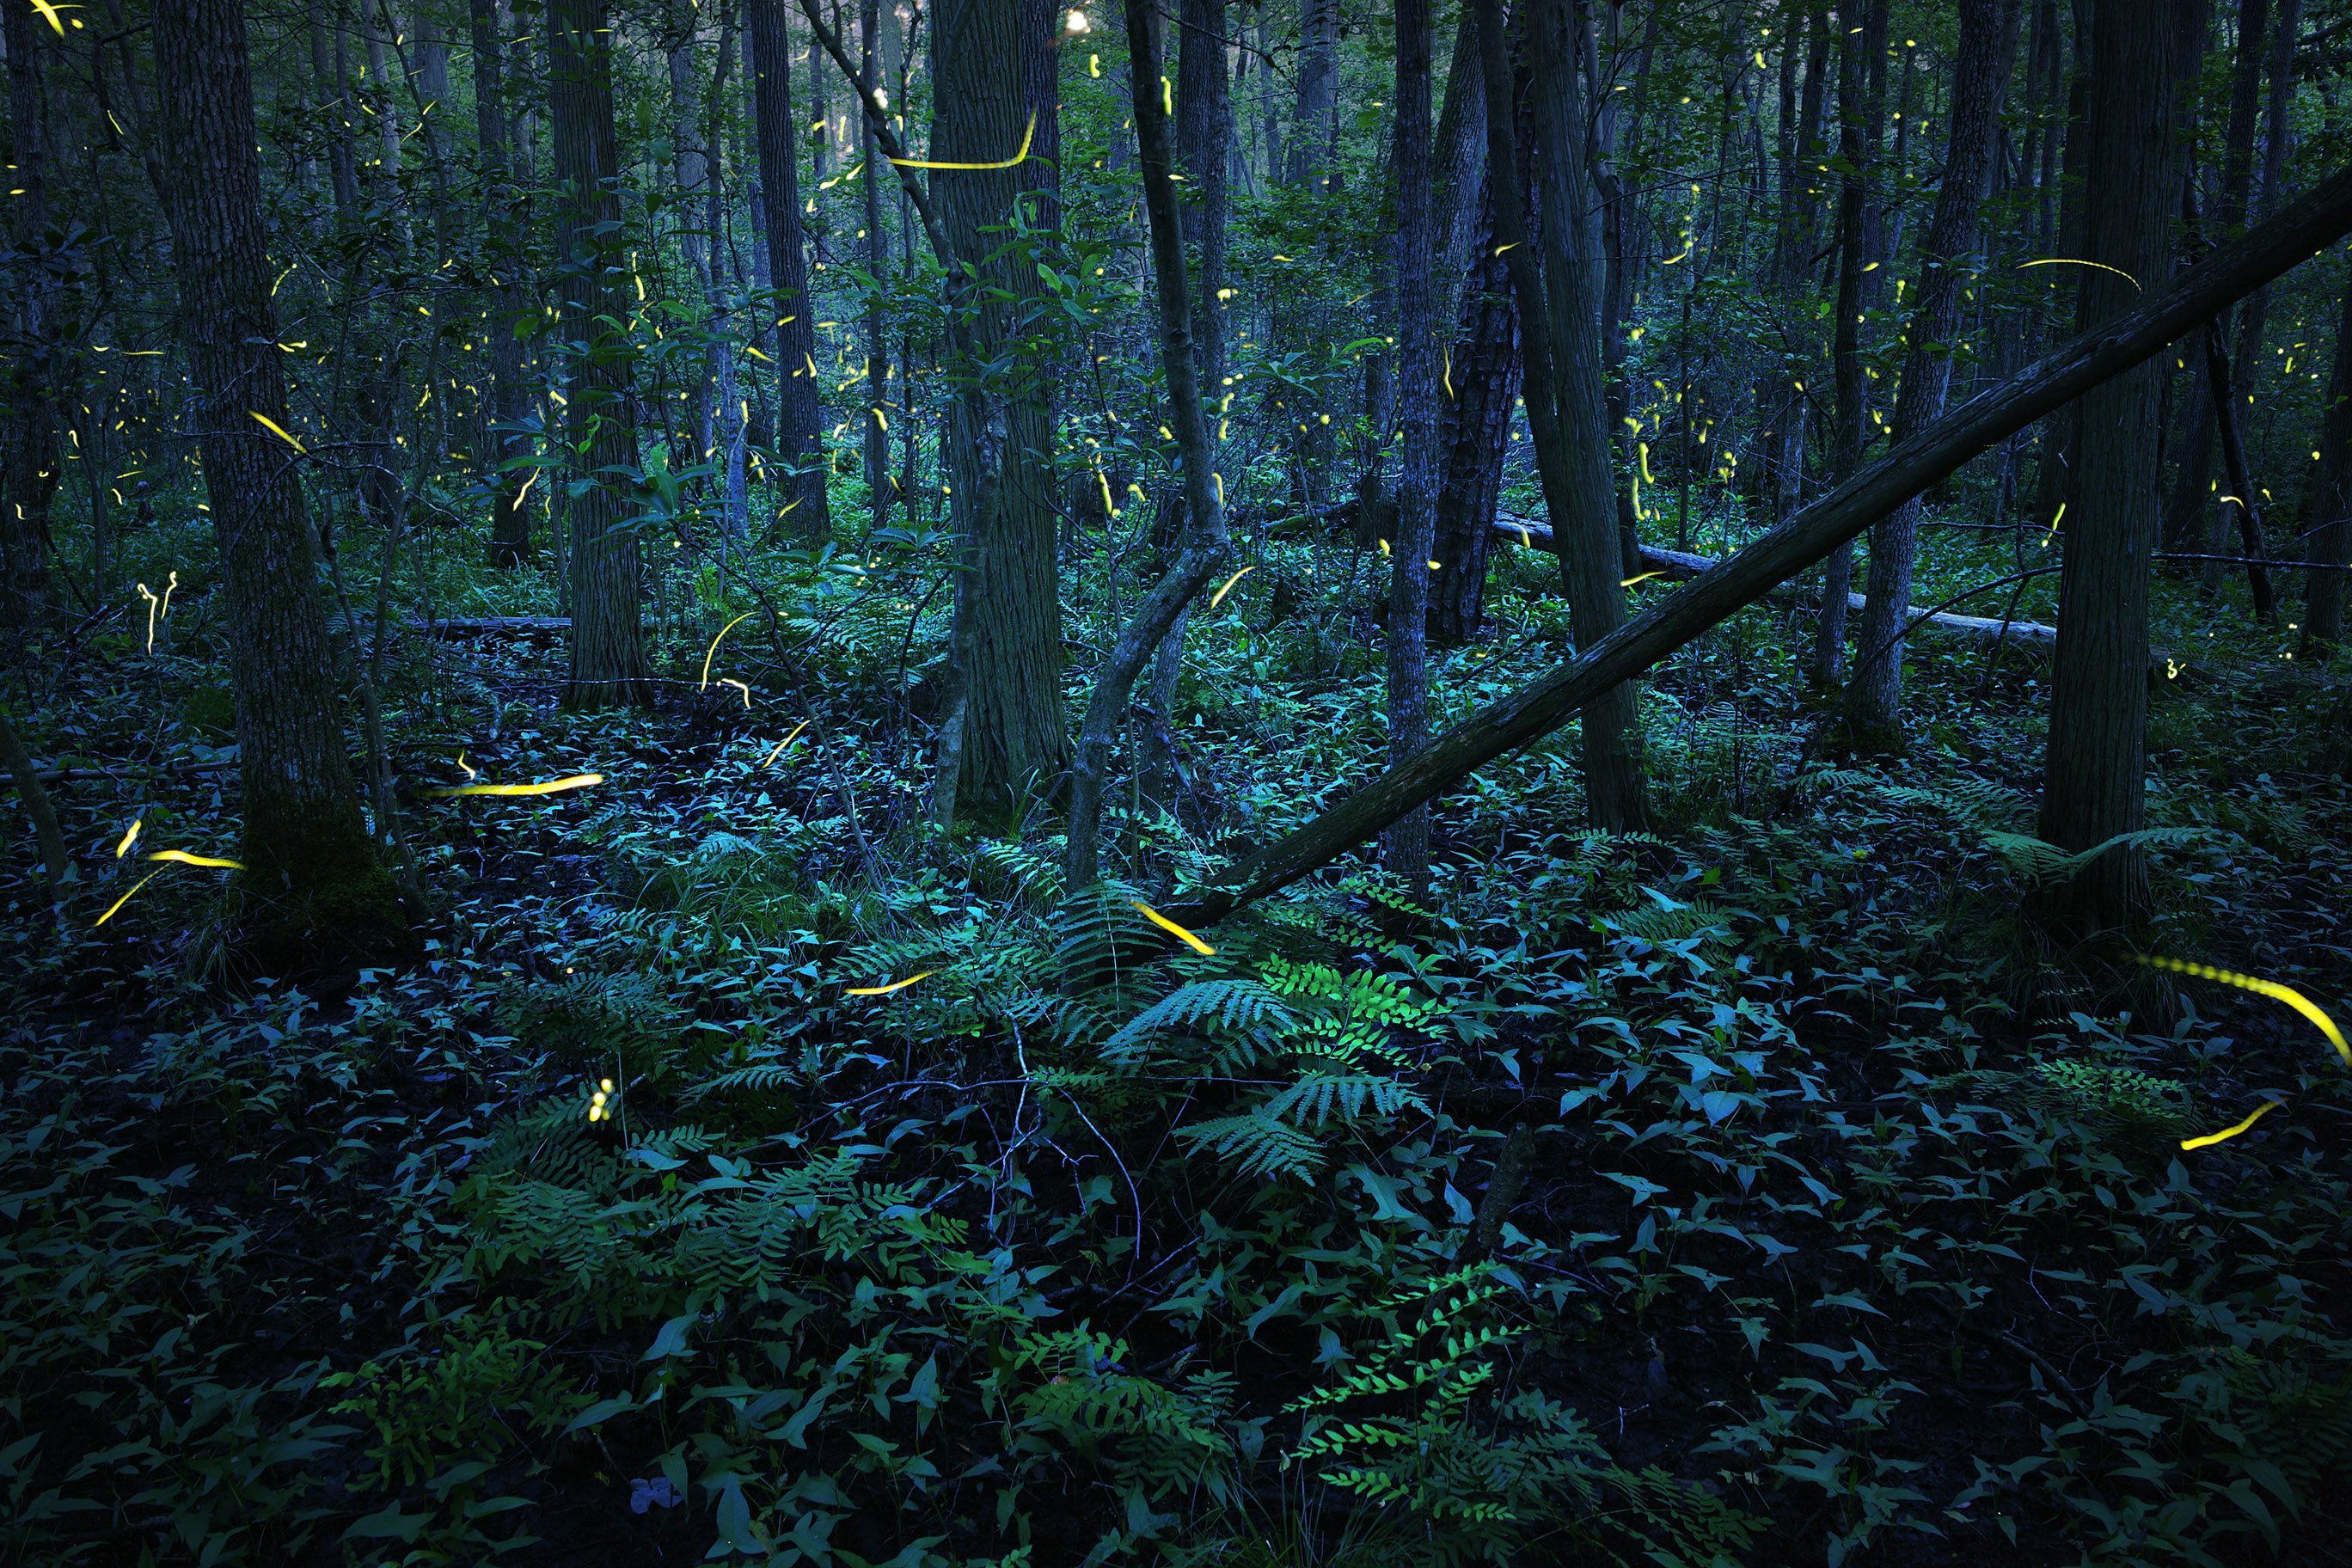 The flashing lights of a mass of fireflies add specks of light to this evening view of a forest